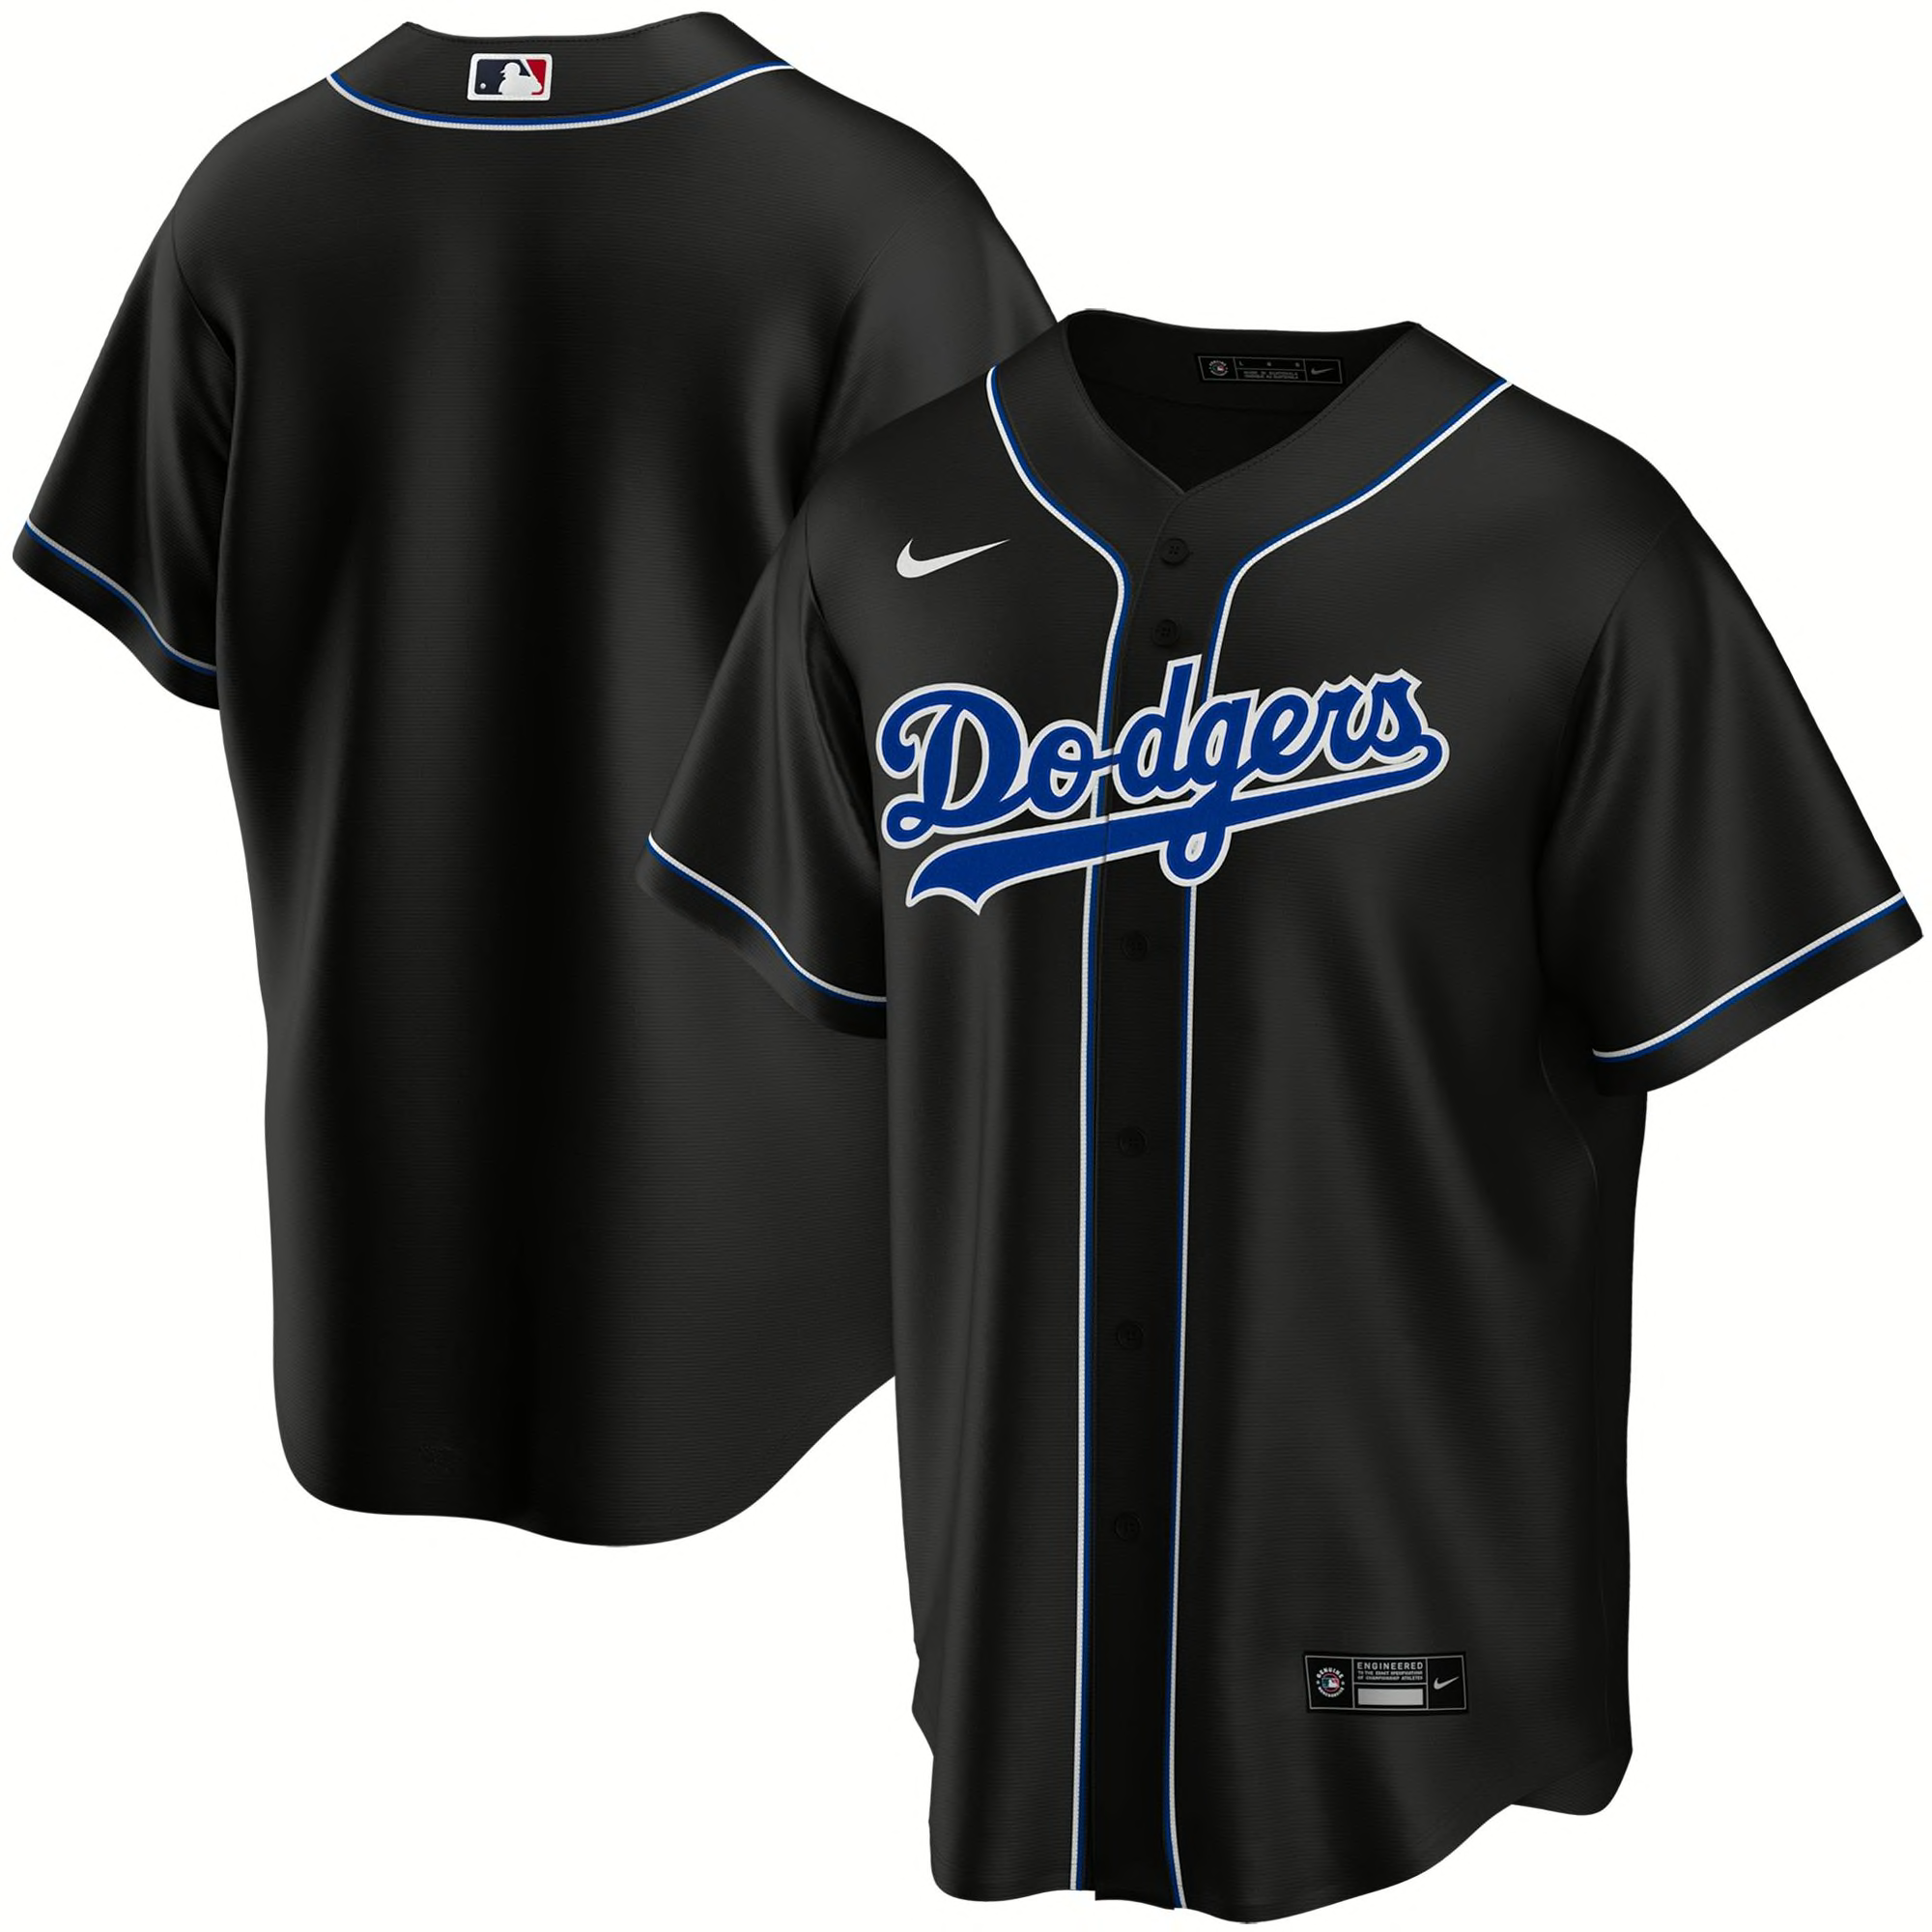 Father's Day gifts for the Los Angeles Dodgers fan